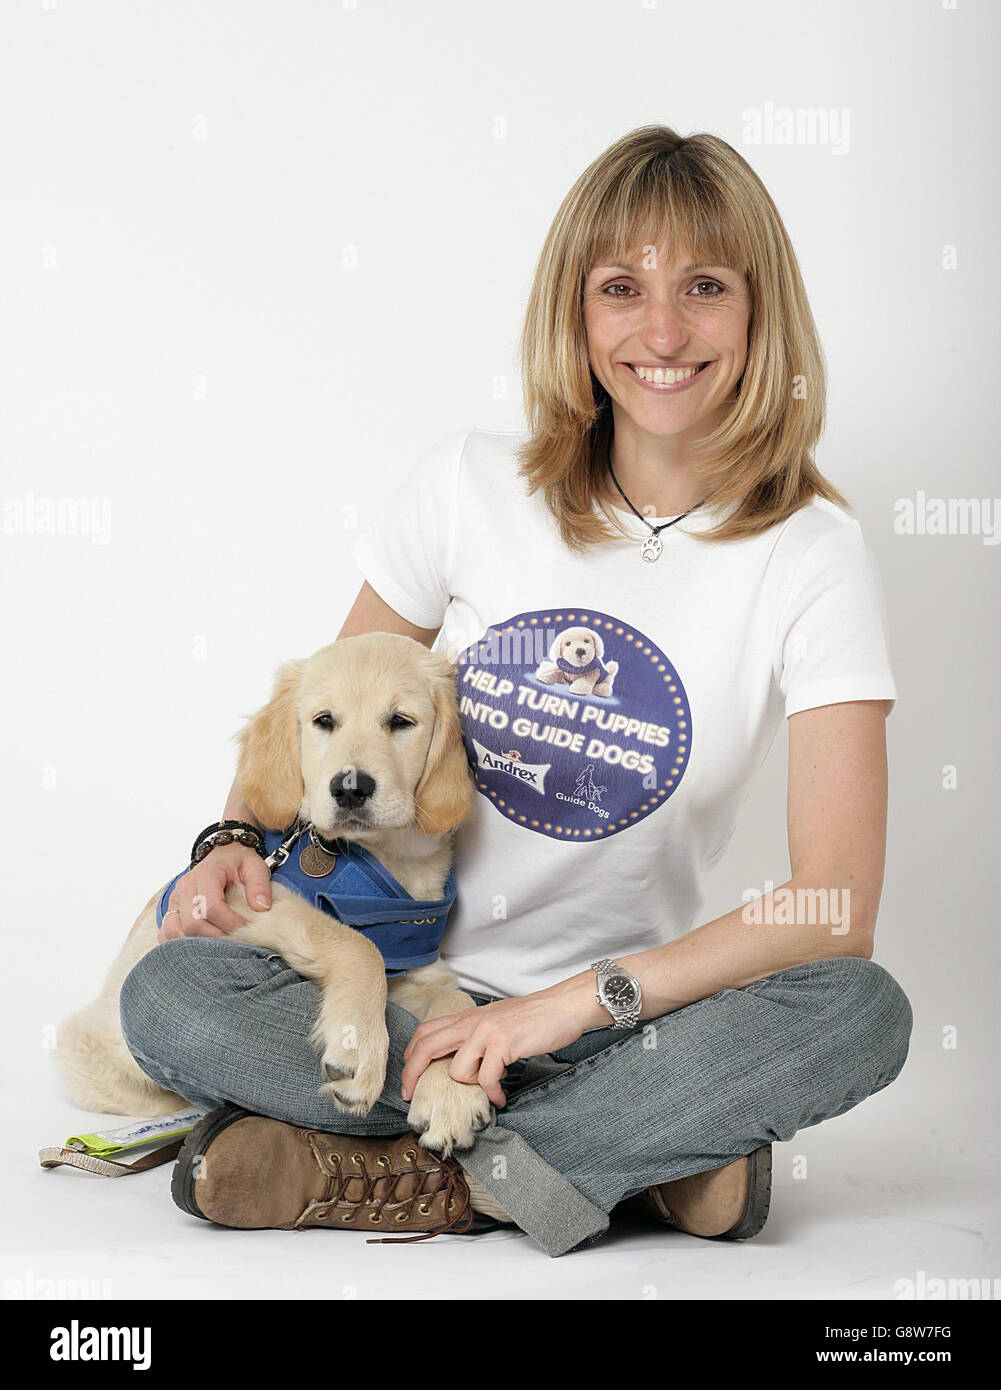 Michaela Strachan celebrates the launch of a new Andrex sponsored campaign to turn more puppies into guide-dogs by means of an on-pack toilet tissue promotion, in partnership with The Guide Dogs for the Blind Association and The Irish Guide Dogs for the Blind, central London, Tuesday 27 September 2005. PRESS ASSOCIATION Photo. Photo credit should read: Edmond Terakopian / PA Stock Photo